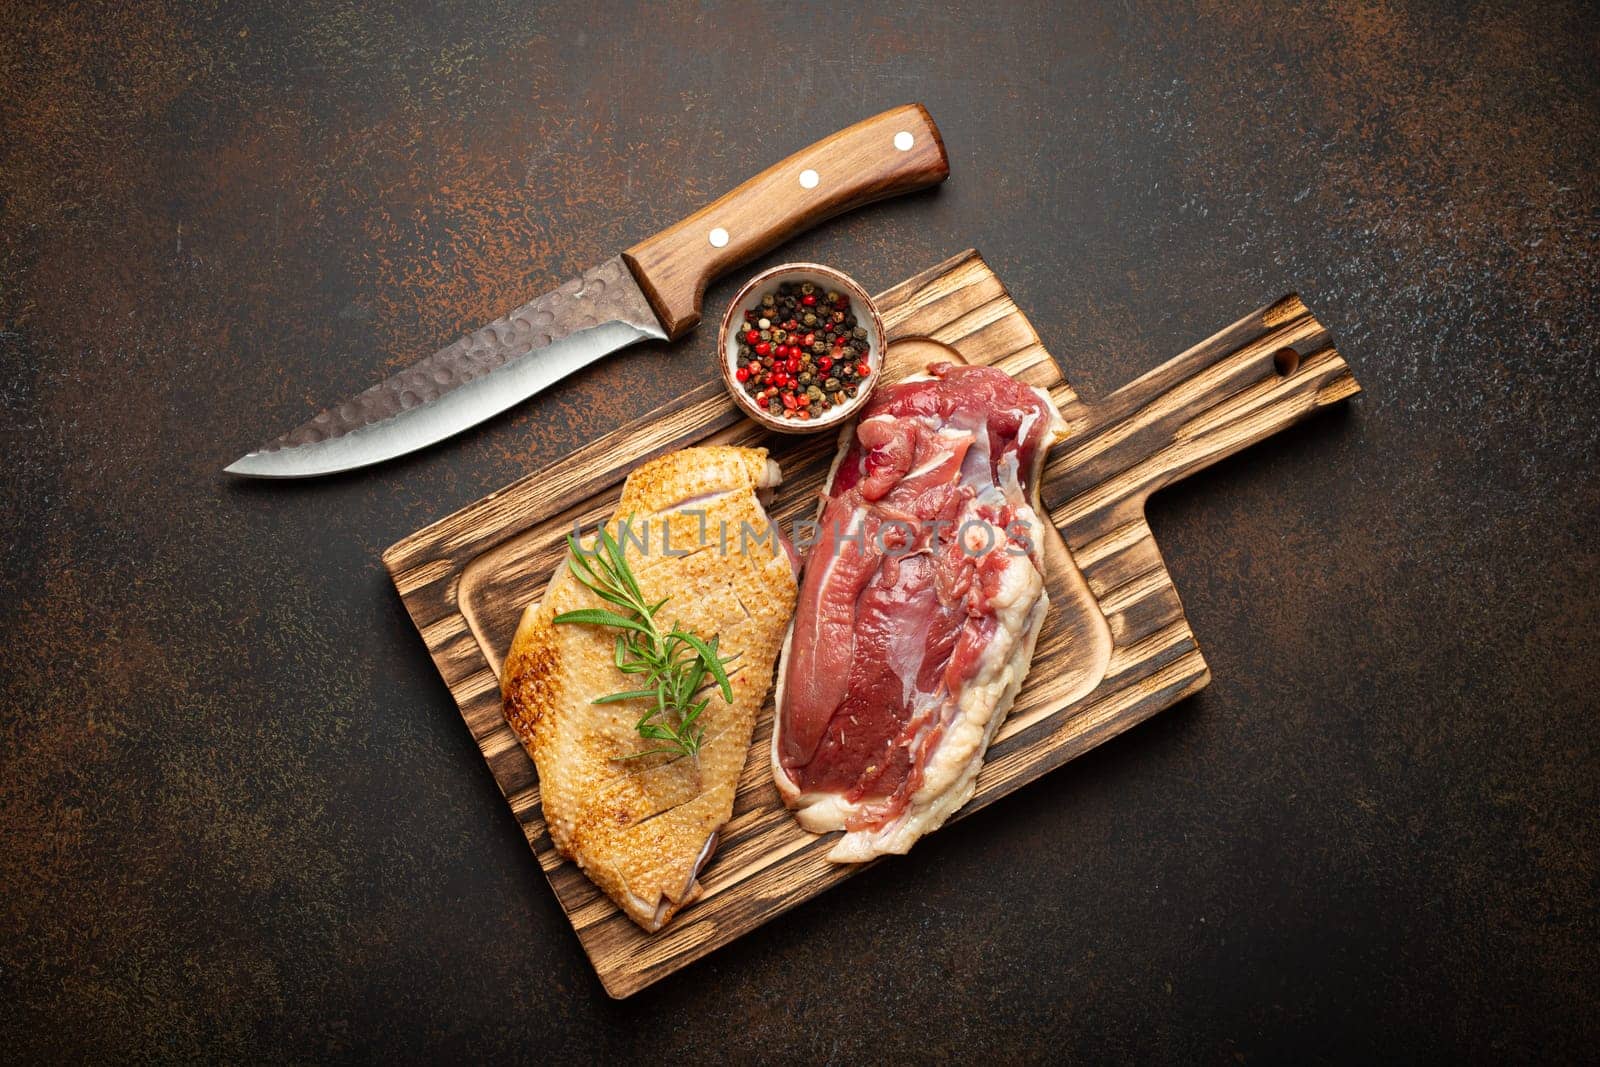 Two raw uncooked duck breast fillets with skin, seasoned with salt, pepper, rosemary top view on wooden cutting board with knife, dark brown concrete rustic background by its_al_dente